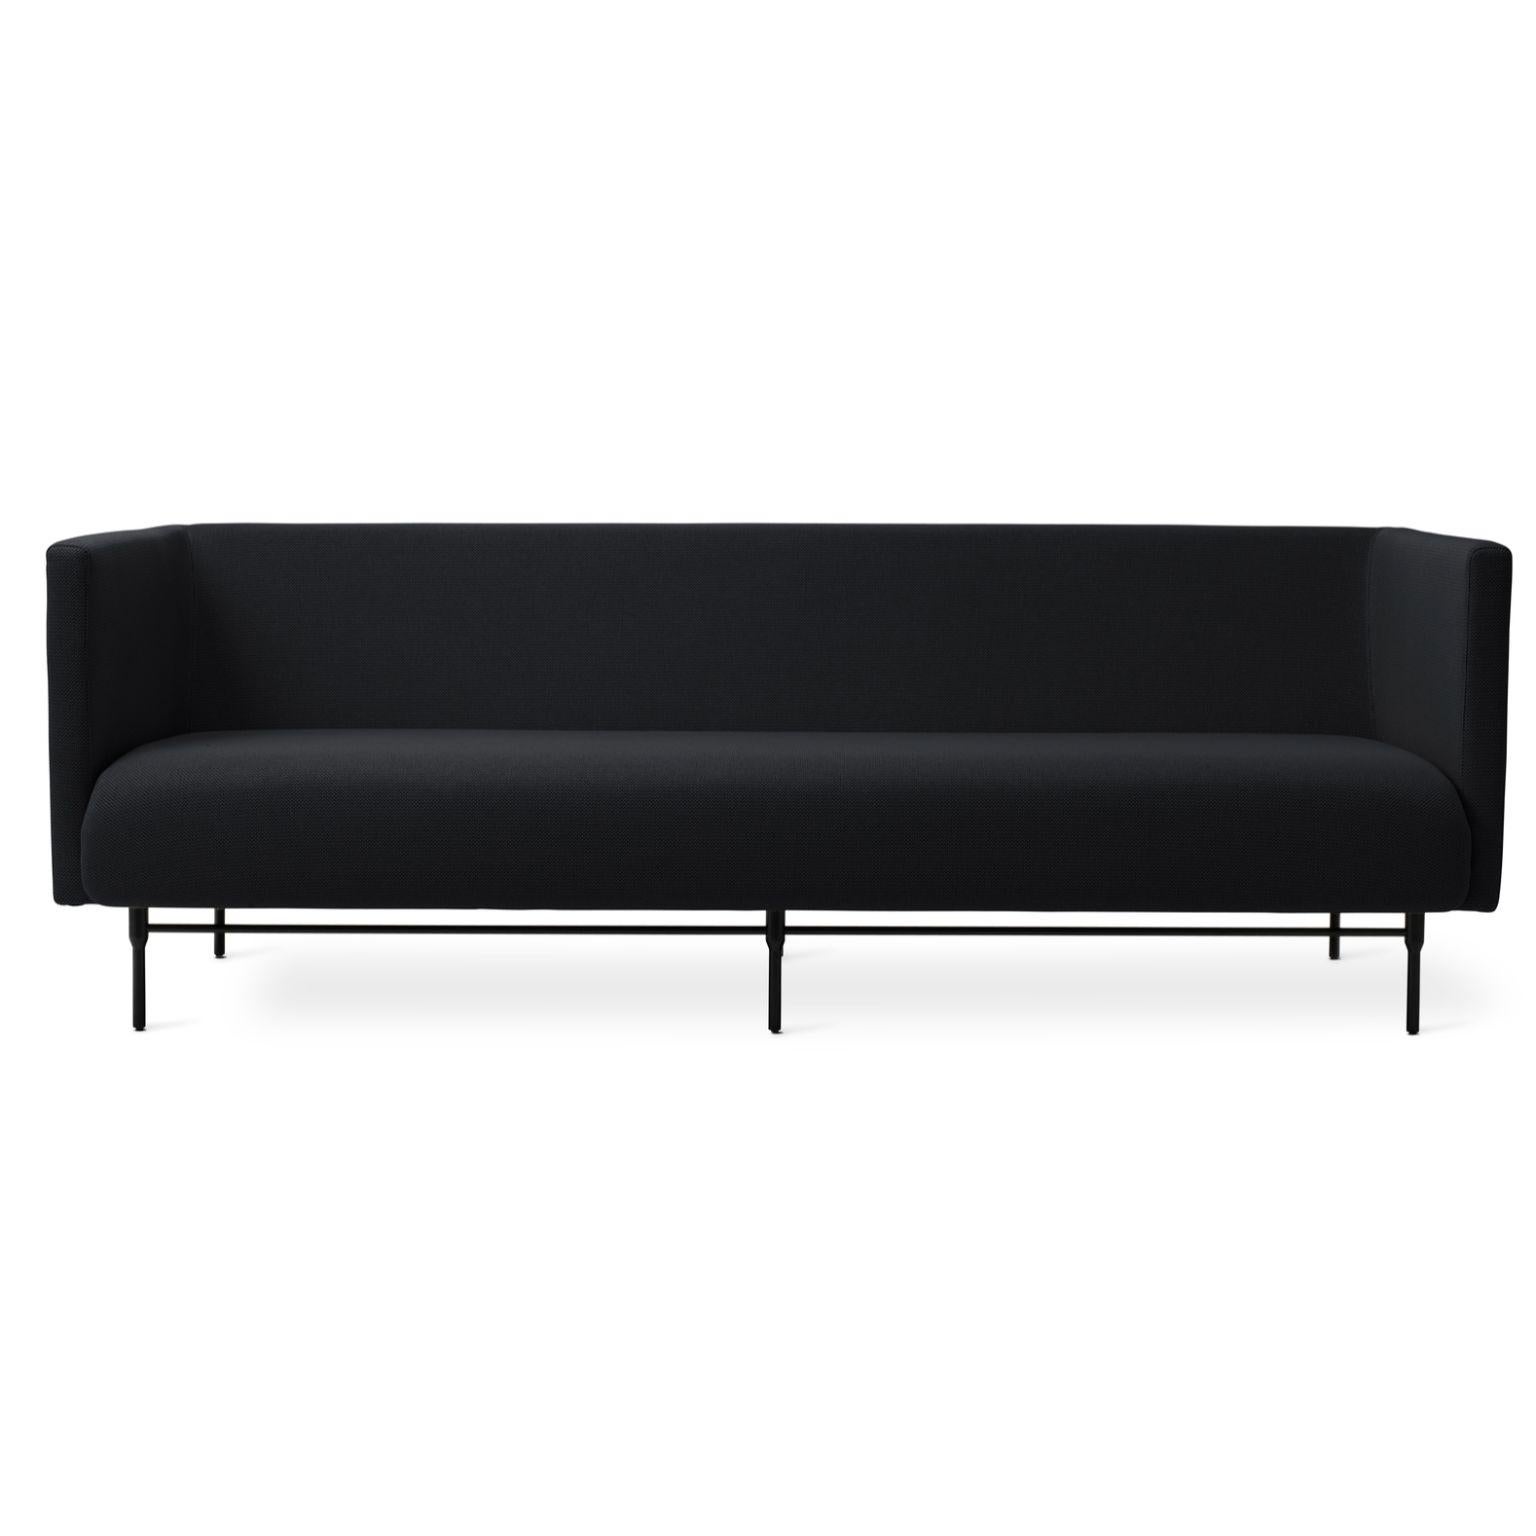 Galore 3 Seater Storm by Warm Nordic
Dimensions: D222 x W83 x H 76 cm
Material: Textile upholstery, Powder coated black steel legs, Wooden frame, foam, spring system.
Weight: 62 kg
Also available in different colours and finishes. Please contact